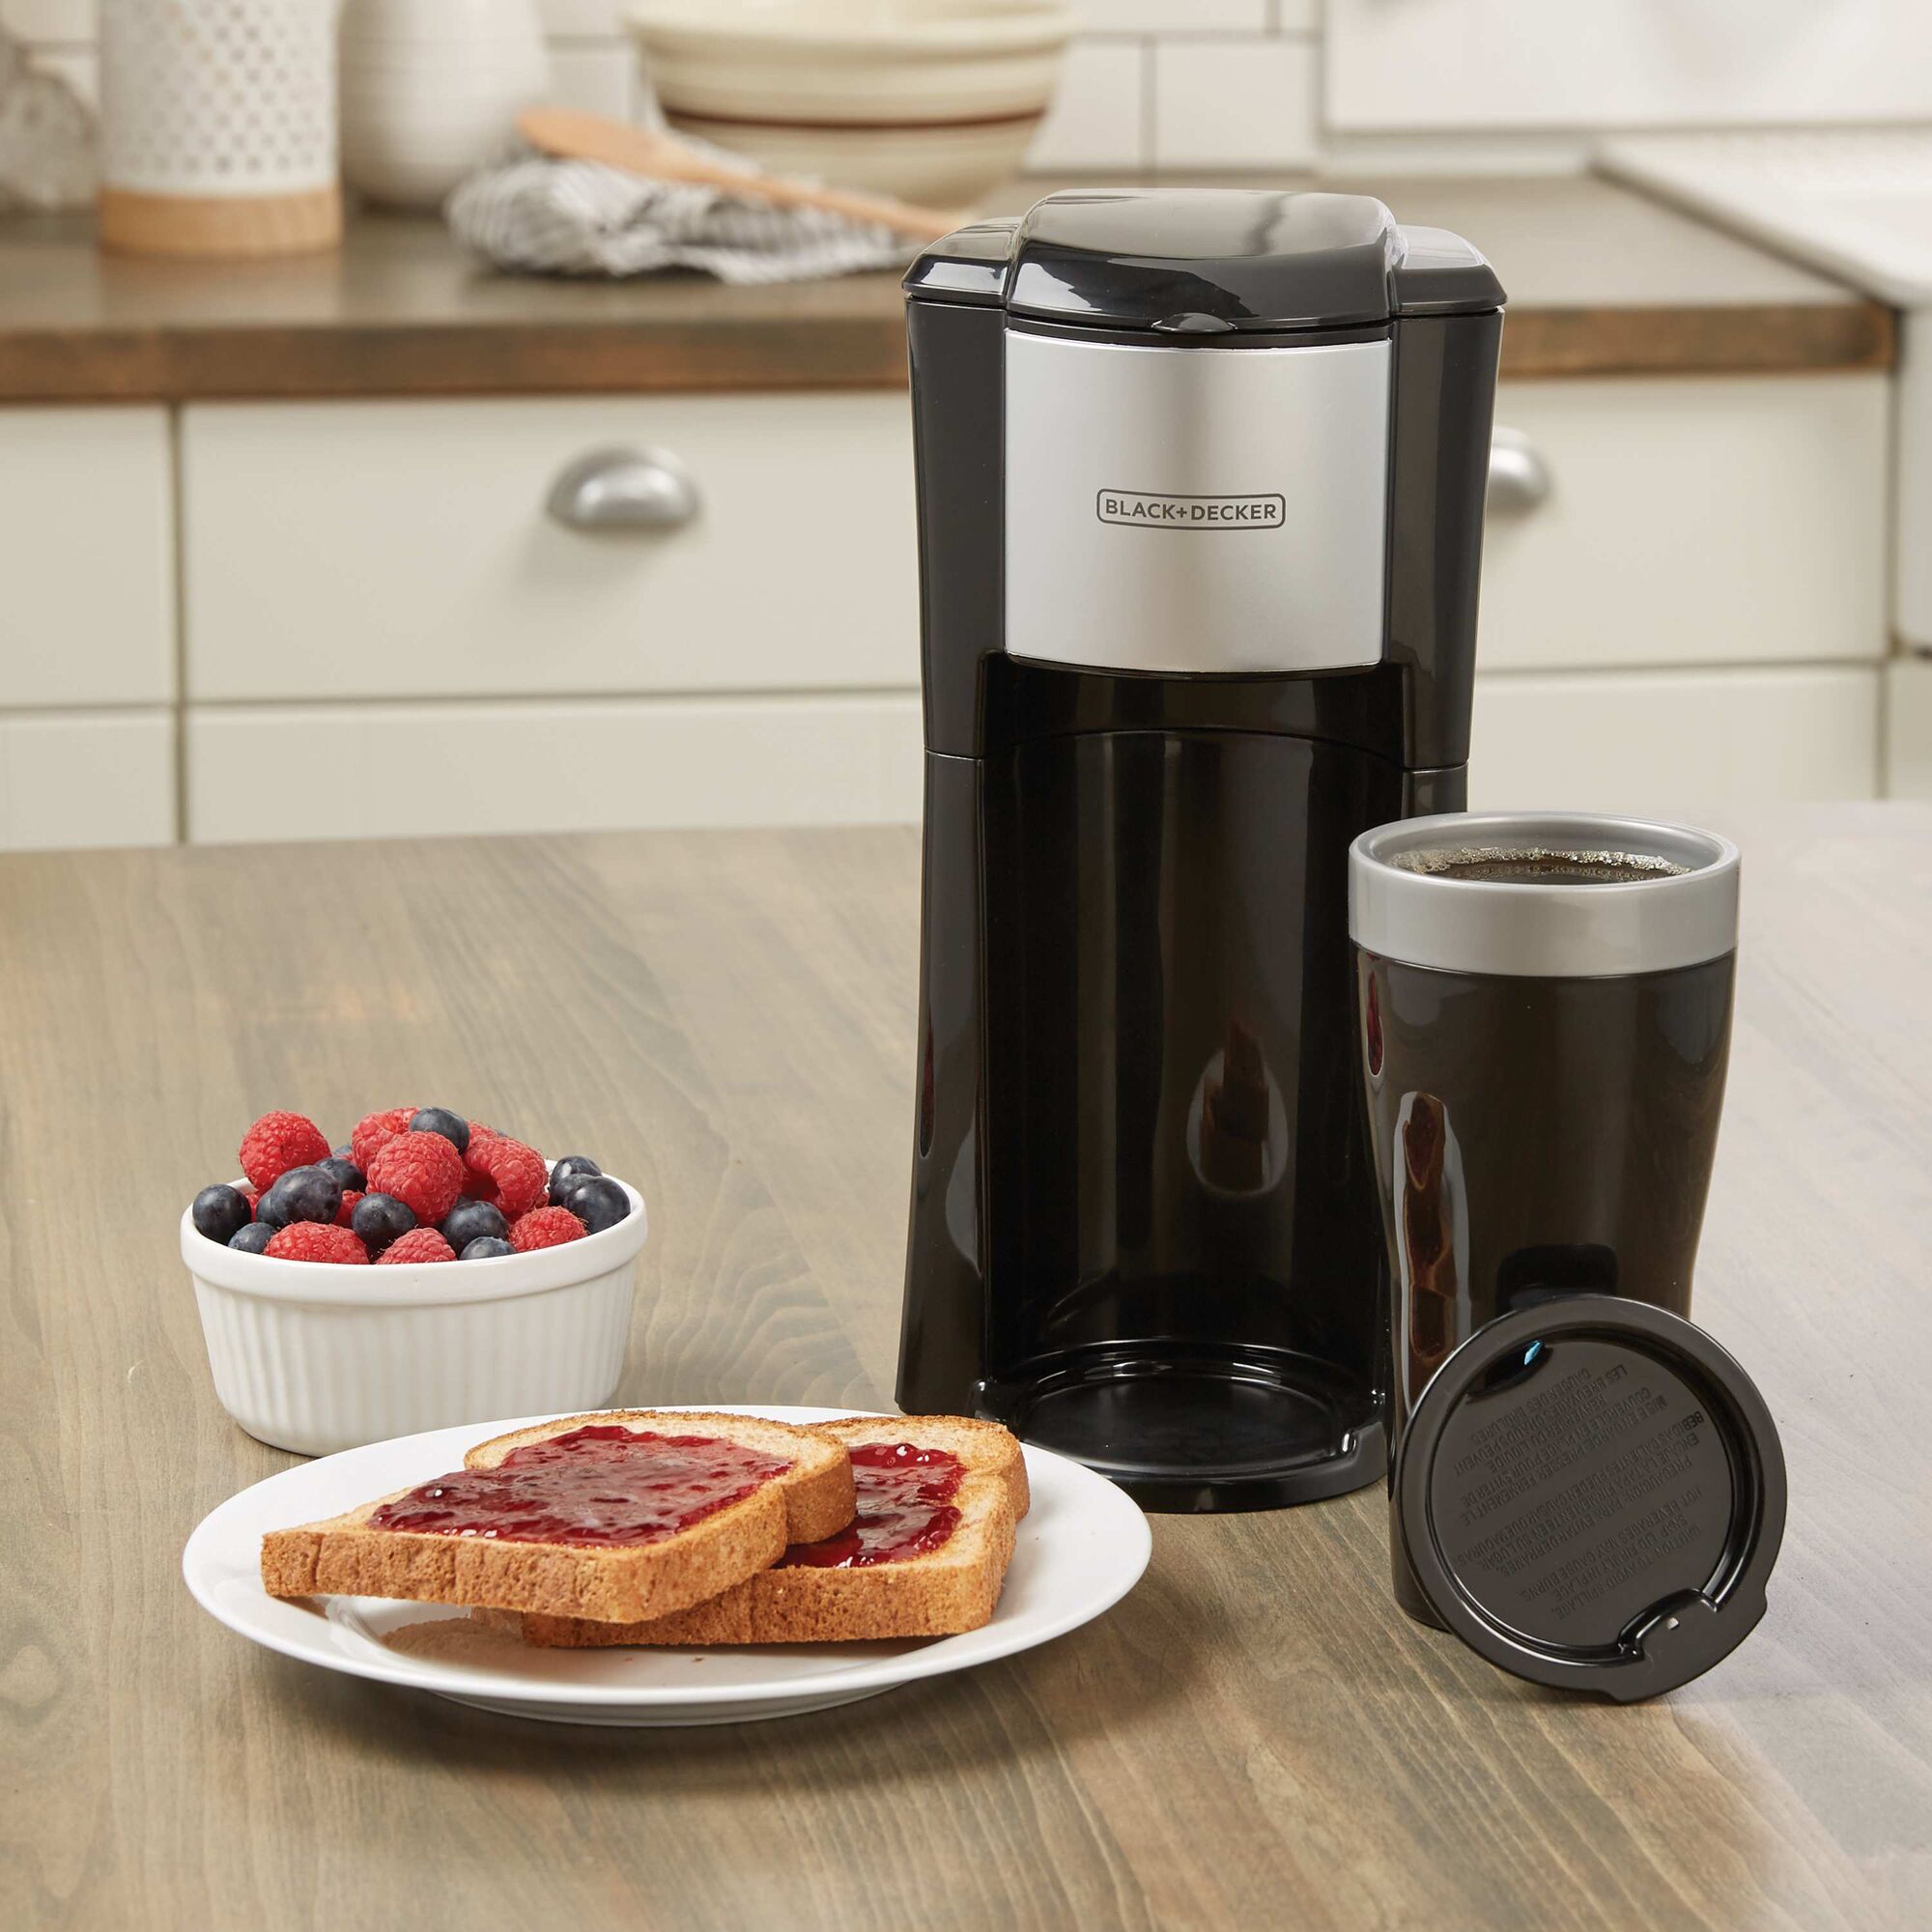 BLACK+DECKER Single Serve Coffee Maker on a kitchen table next to toast and berries